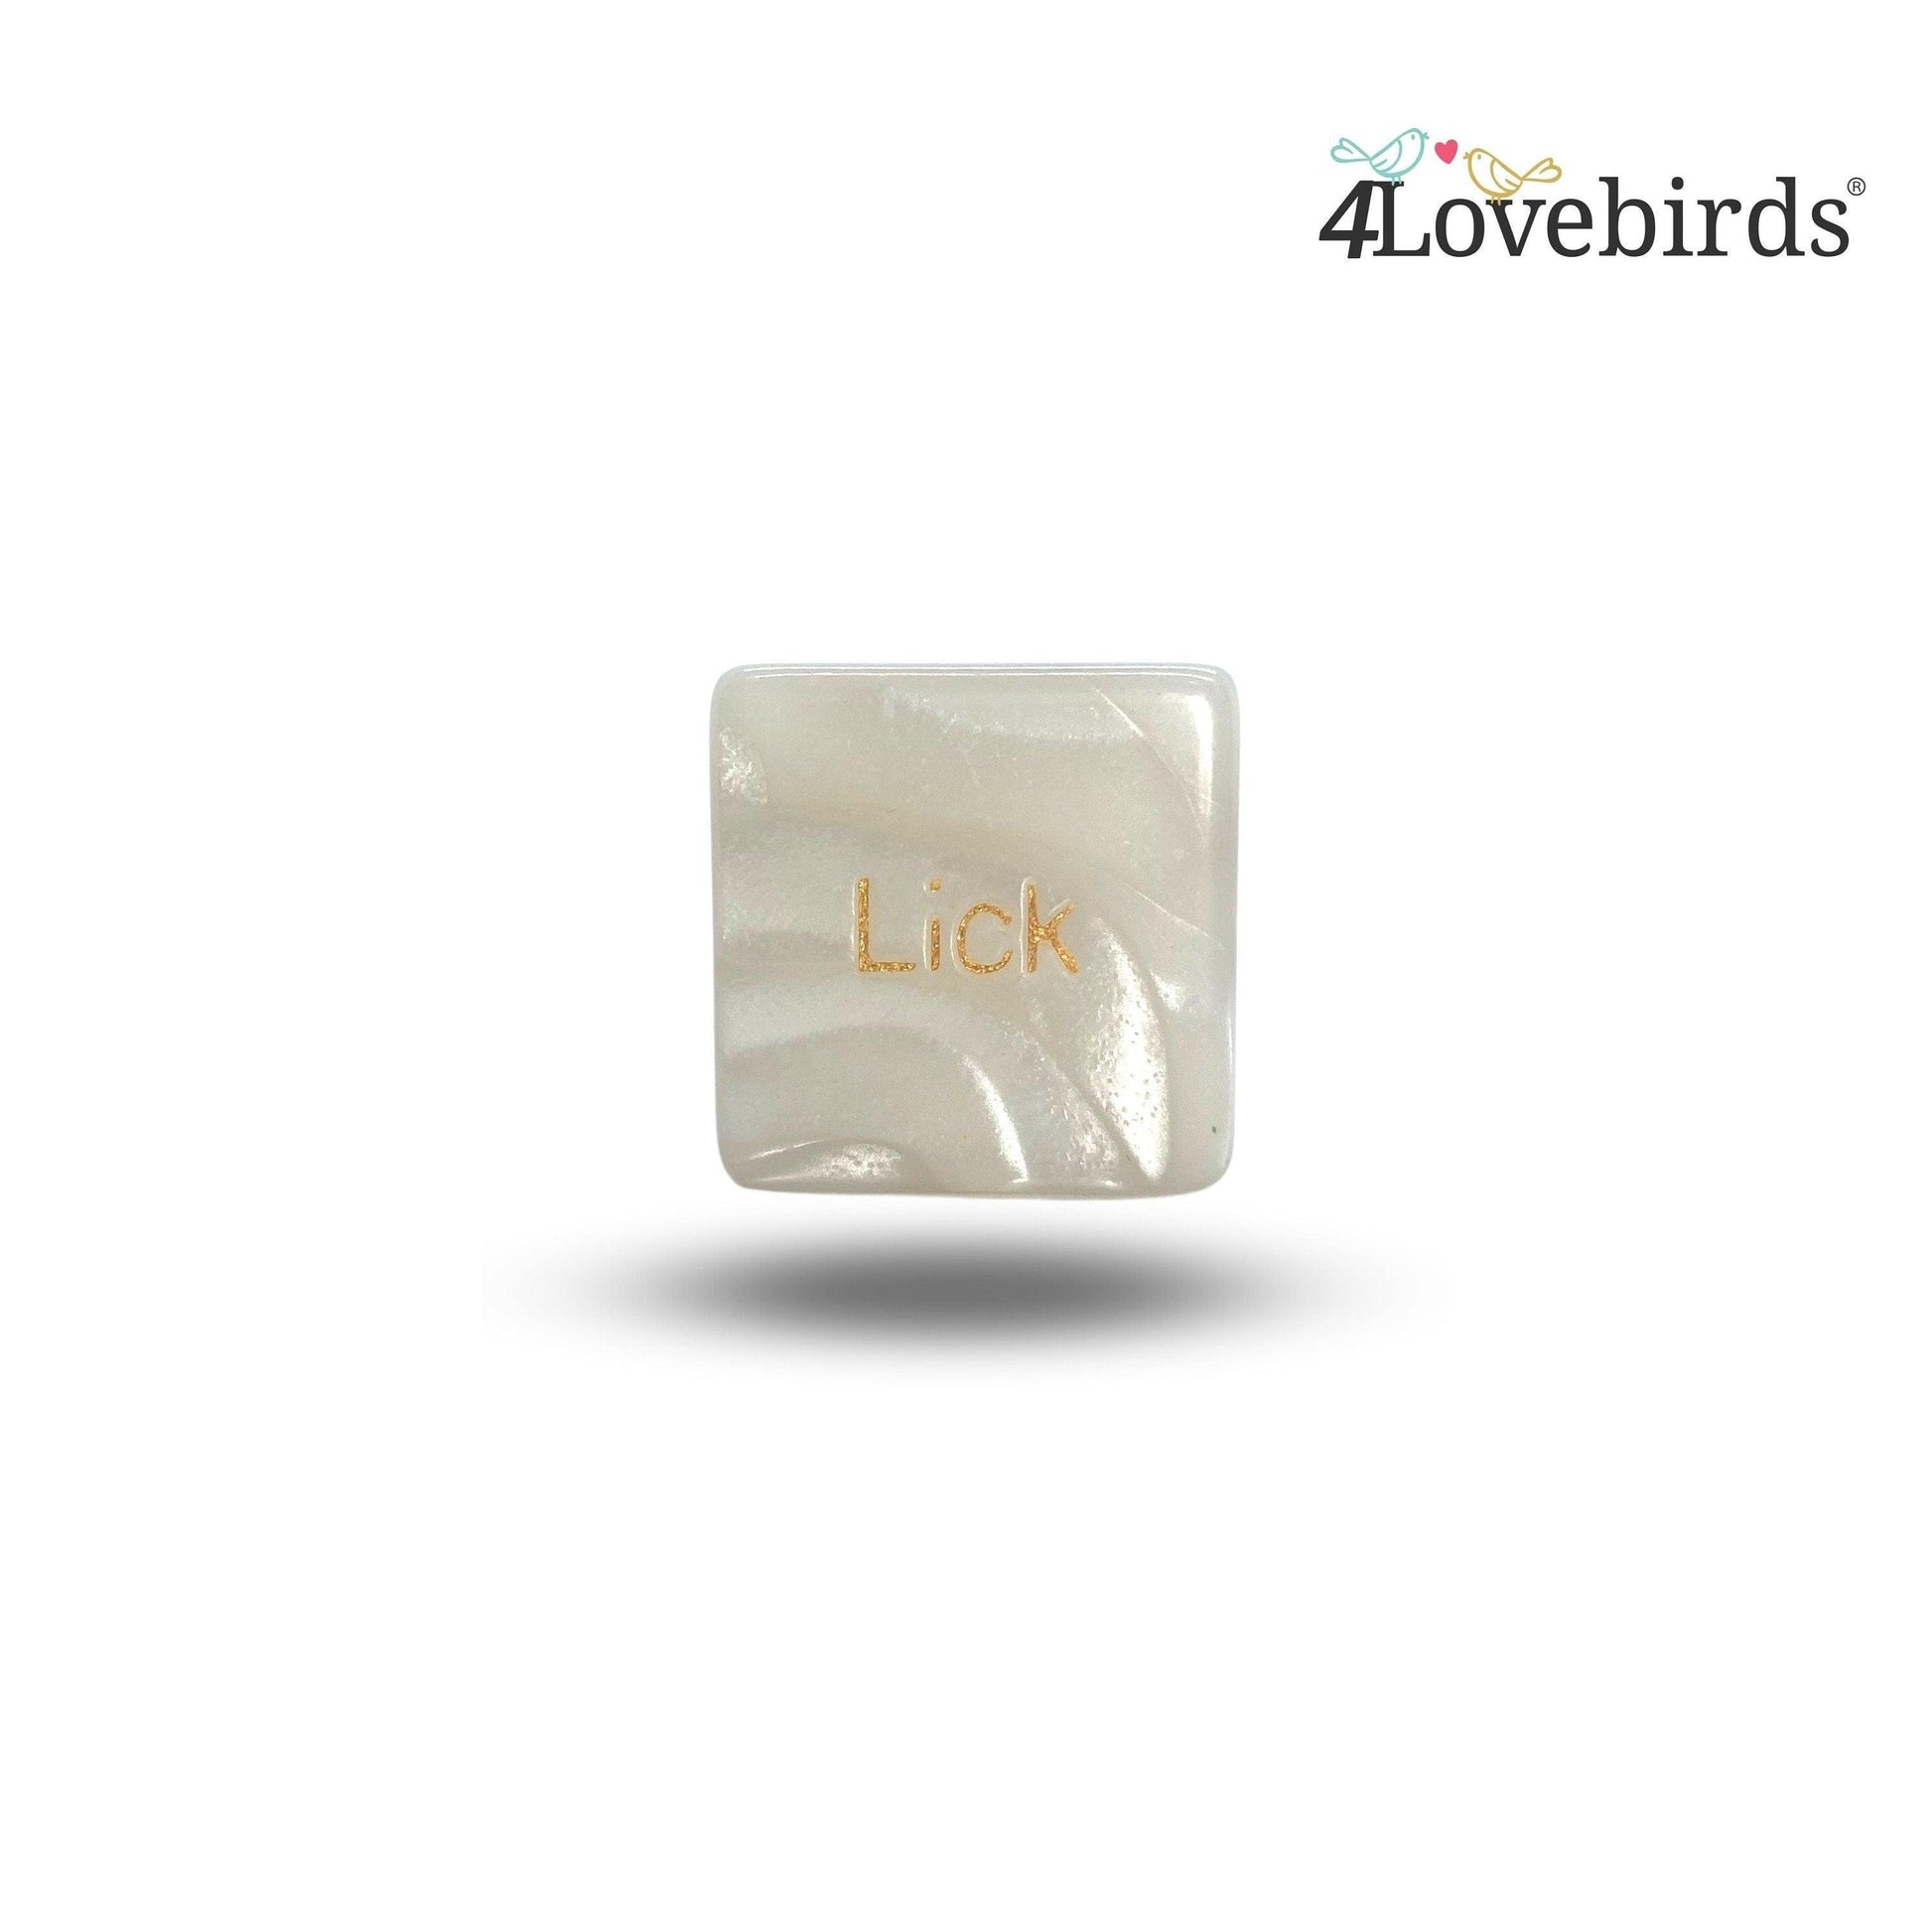 5 Sex Dice, sex positions, fun in the bedroom, bedroom game, fun game, husband birthday, wife birthday, anniversary gift, valentine’s day - 4Lovebirds